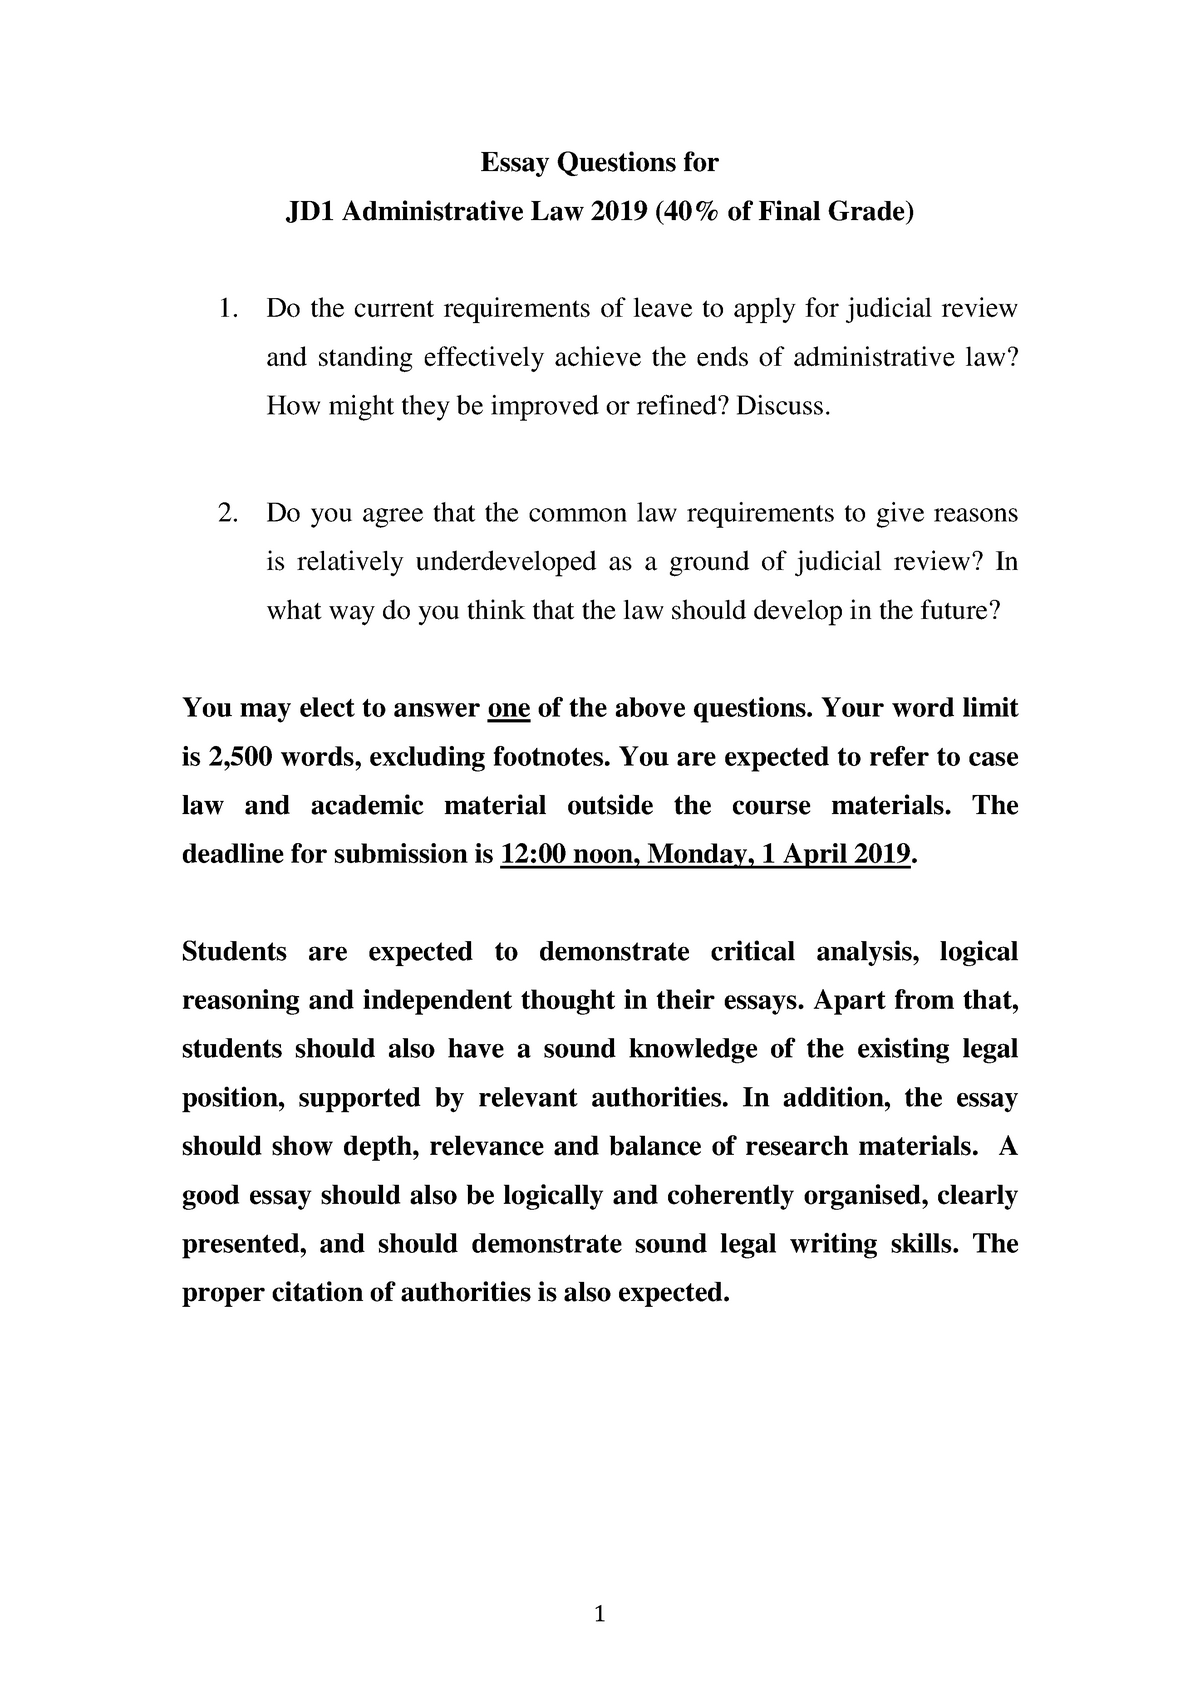 final-10-march-2019-questions-essay-questions-for-jd1-administrative